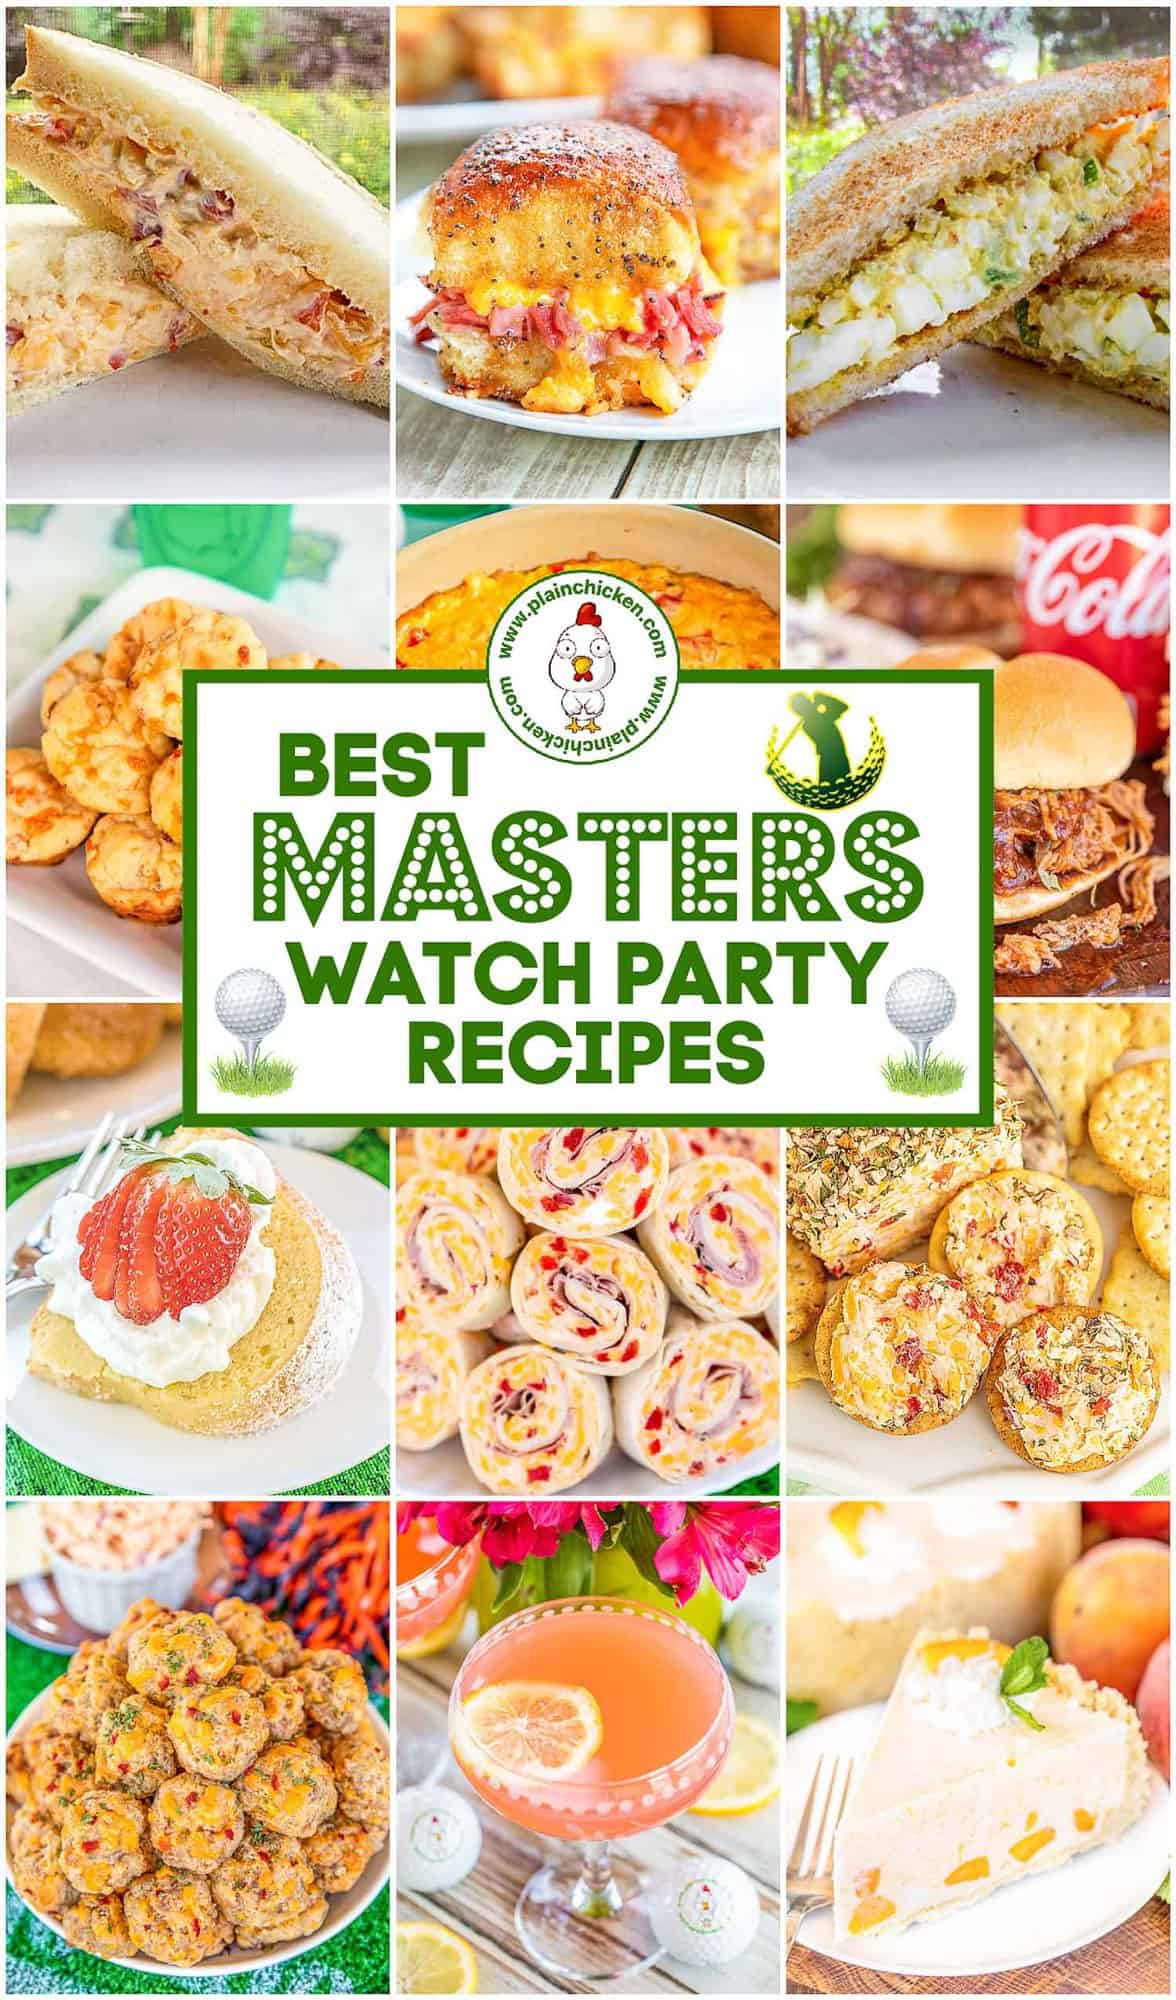 15 Recipes for Watching The Masters Tournament